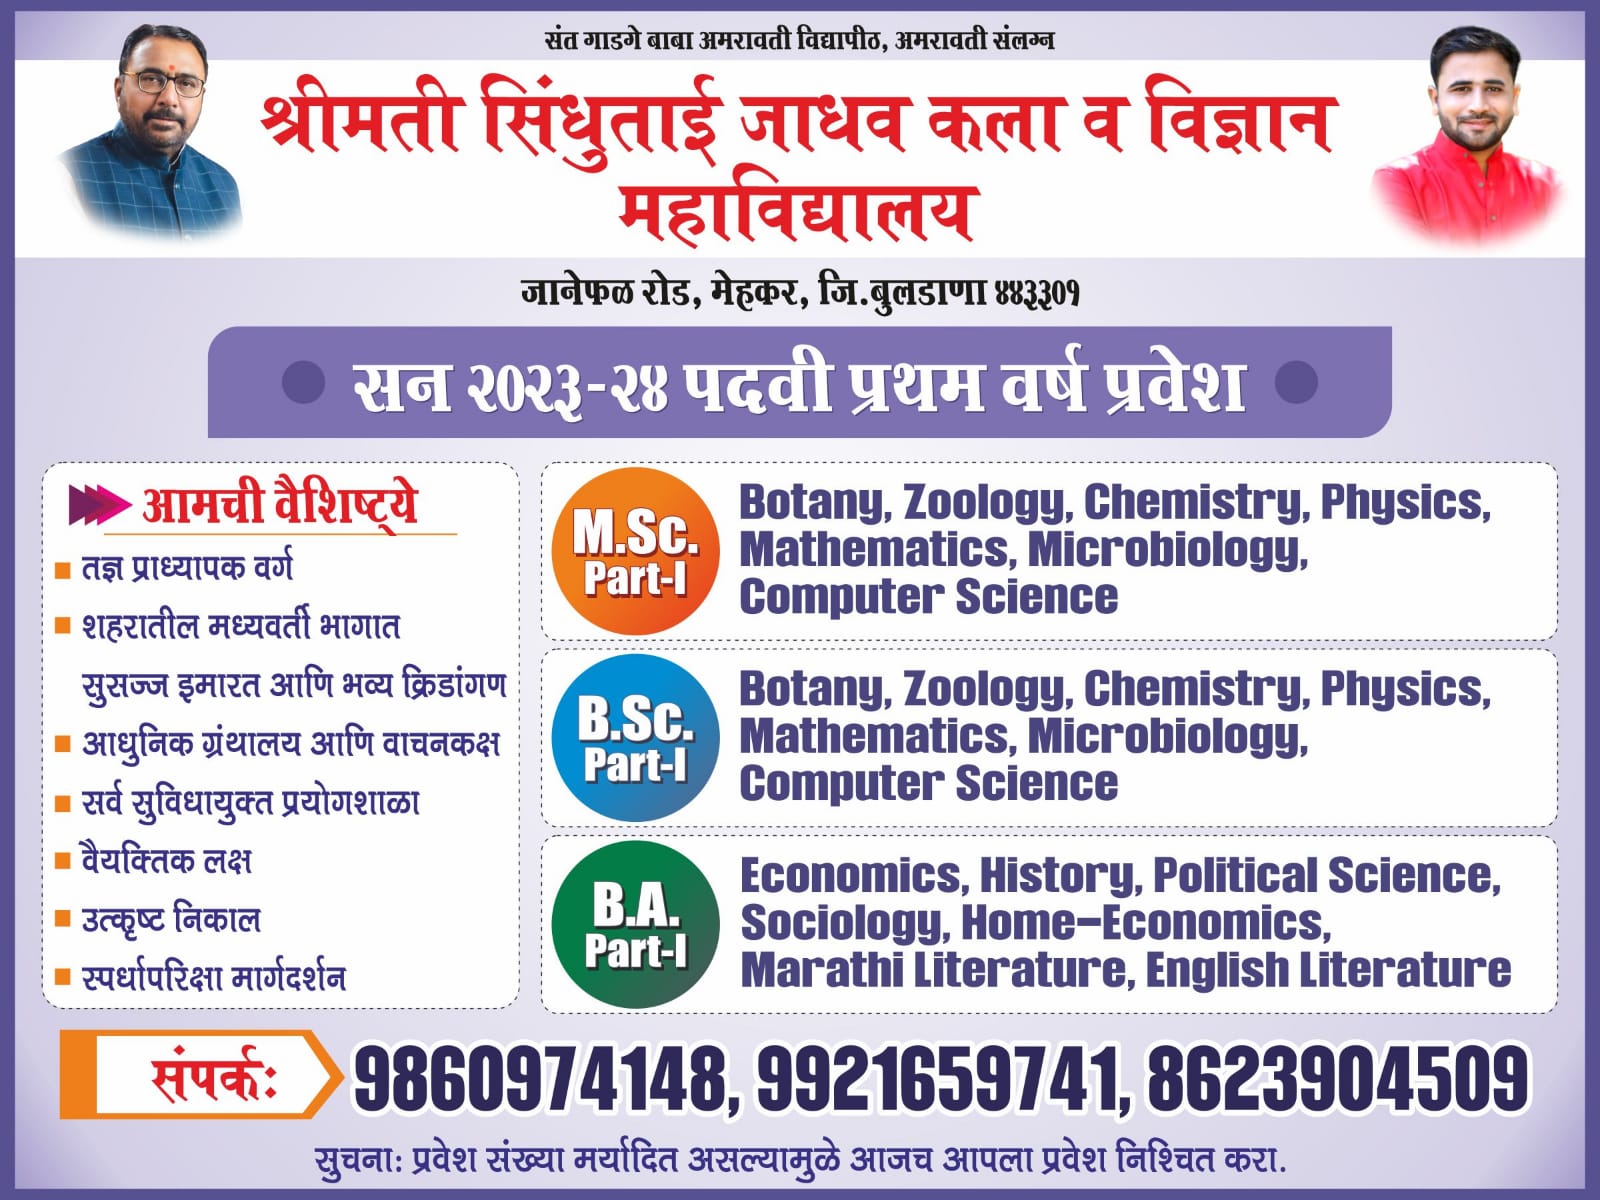 Admissions are Open